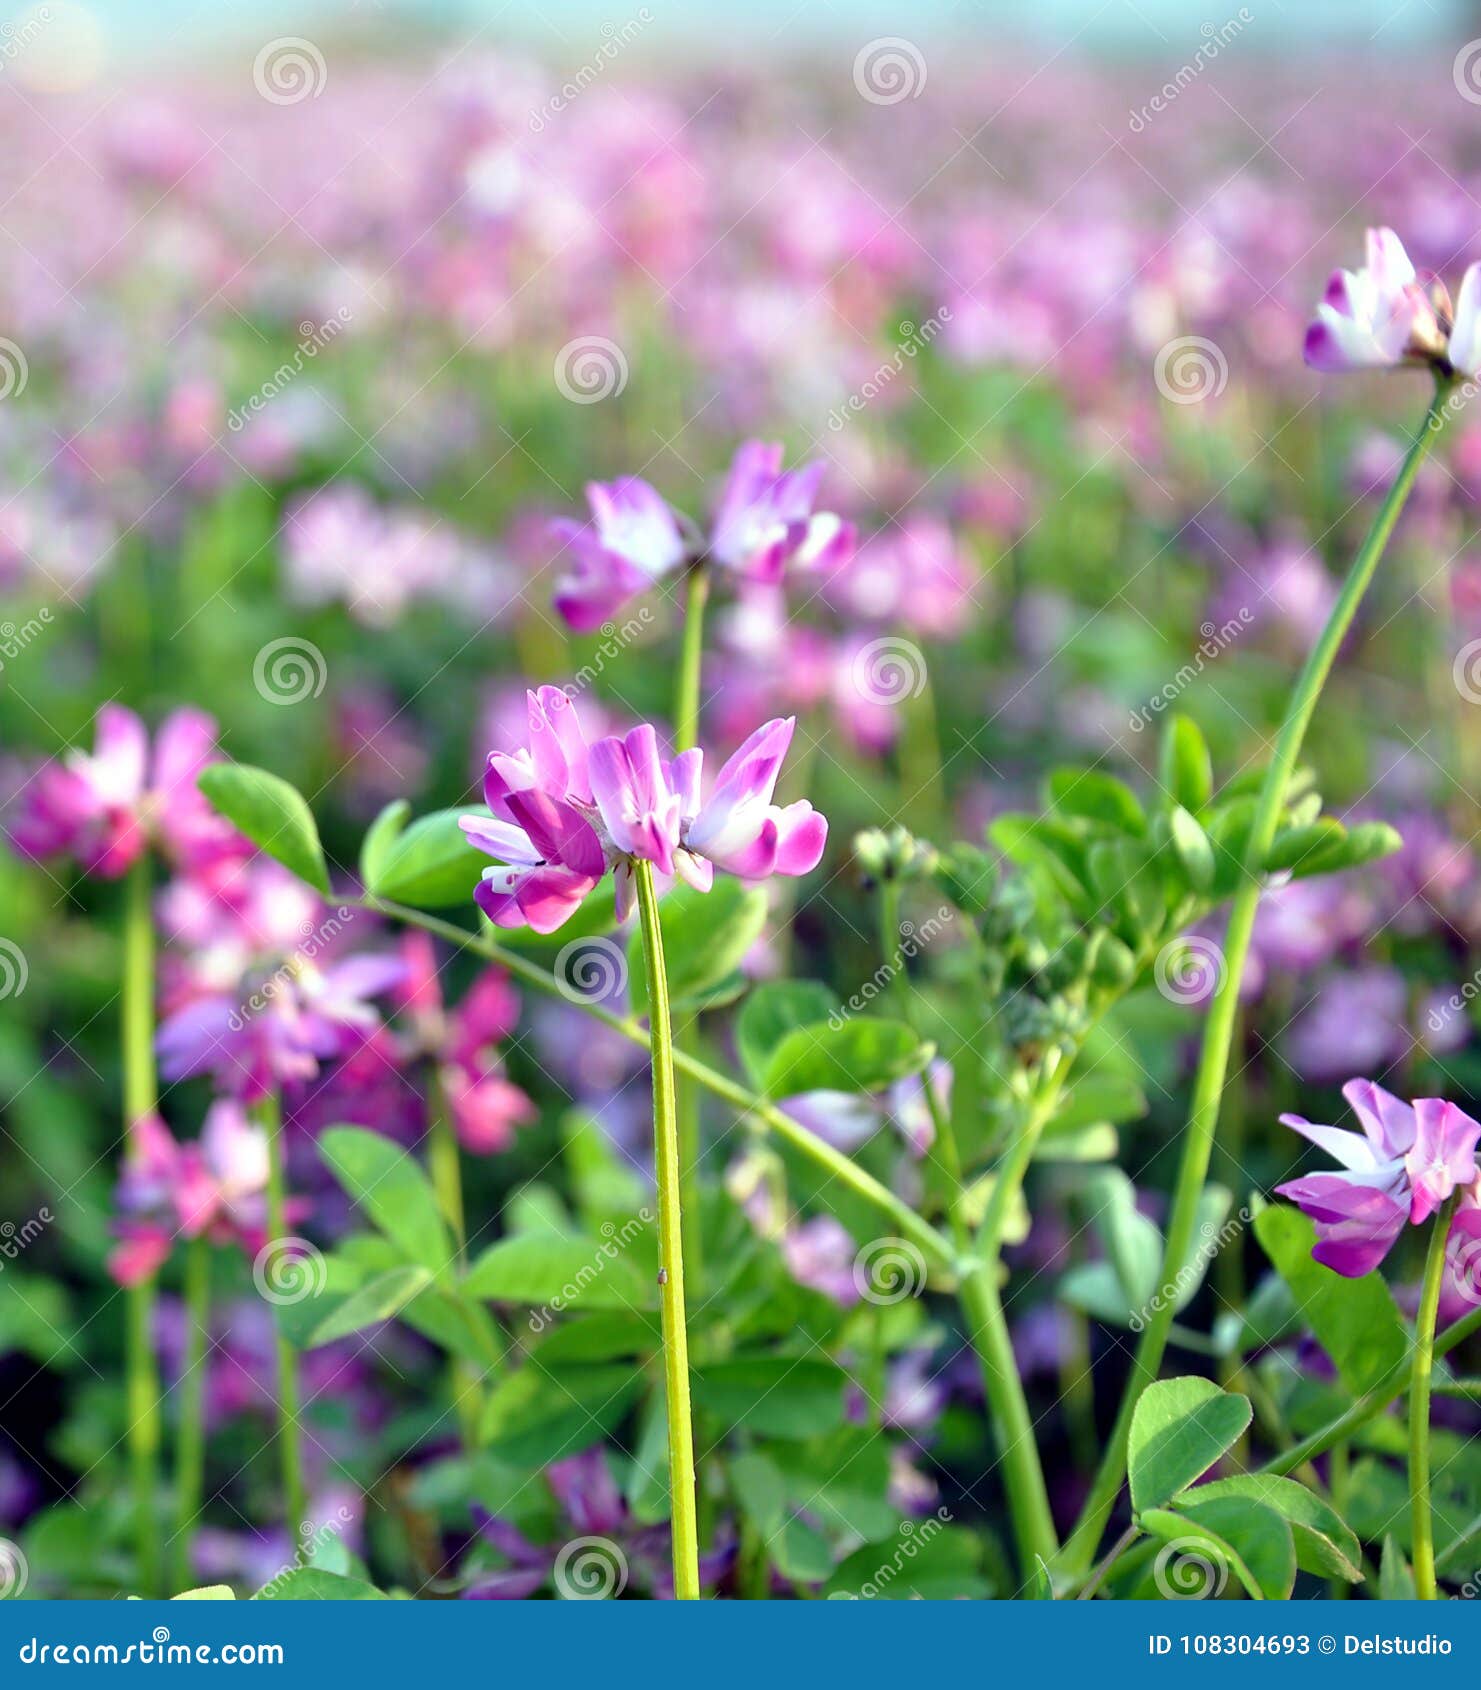 close up of alfalfa flowers also called lucerne